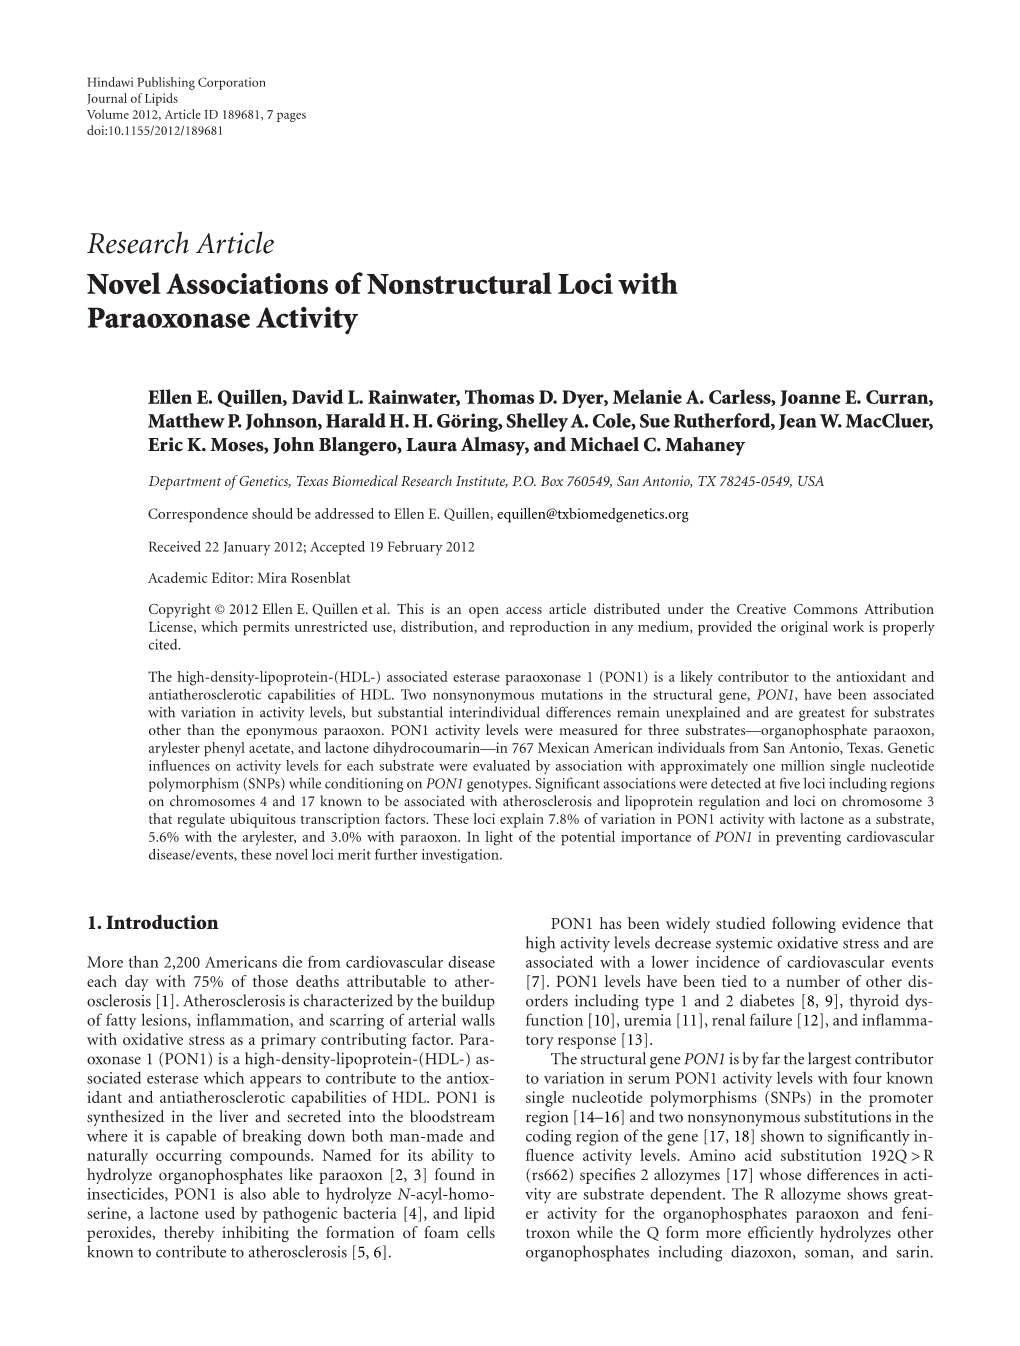 Novel Associations of Nonstructural Loci with Paraoxonase Activity